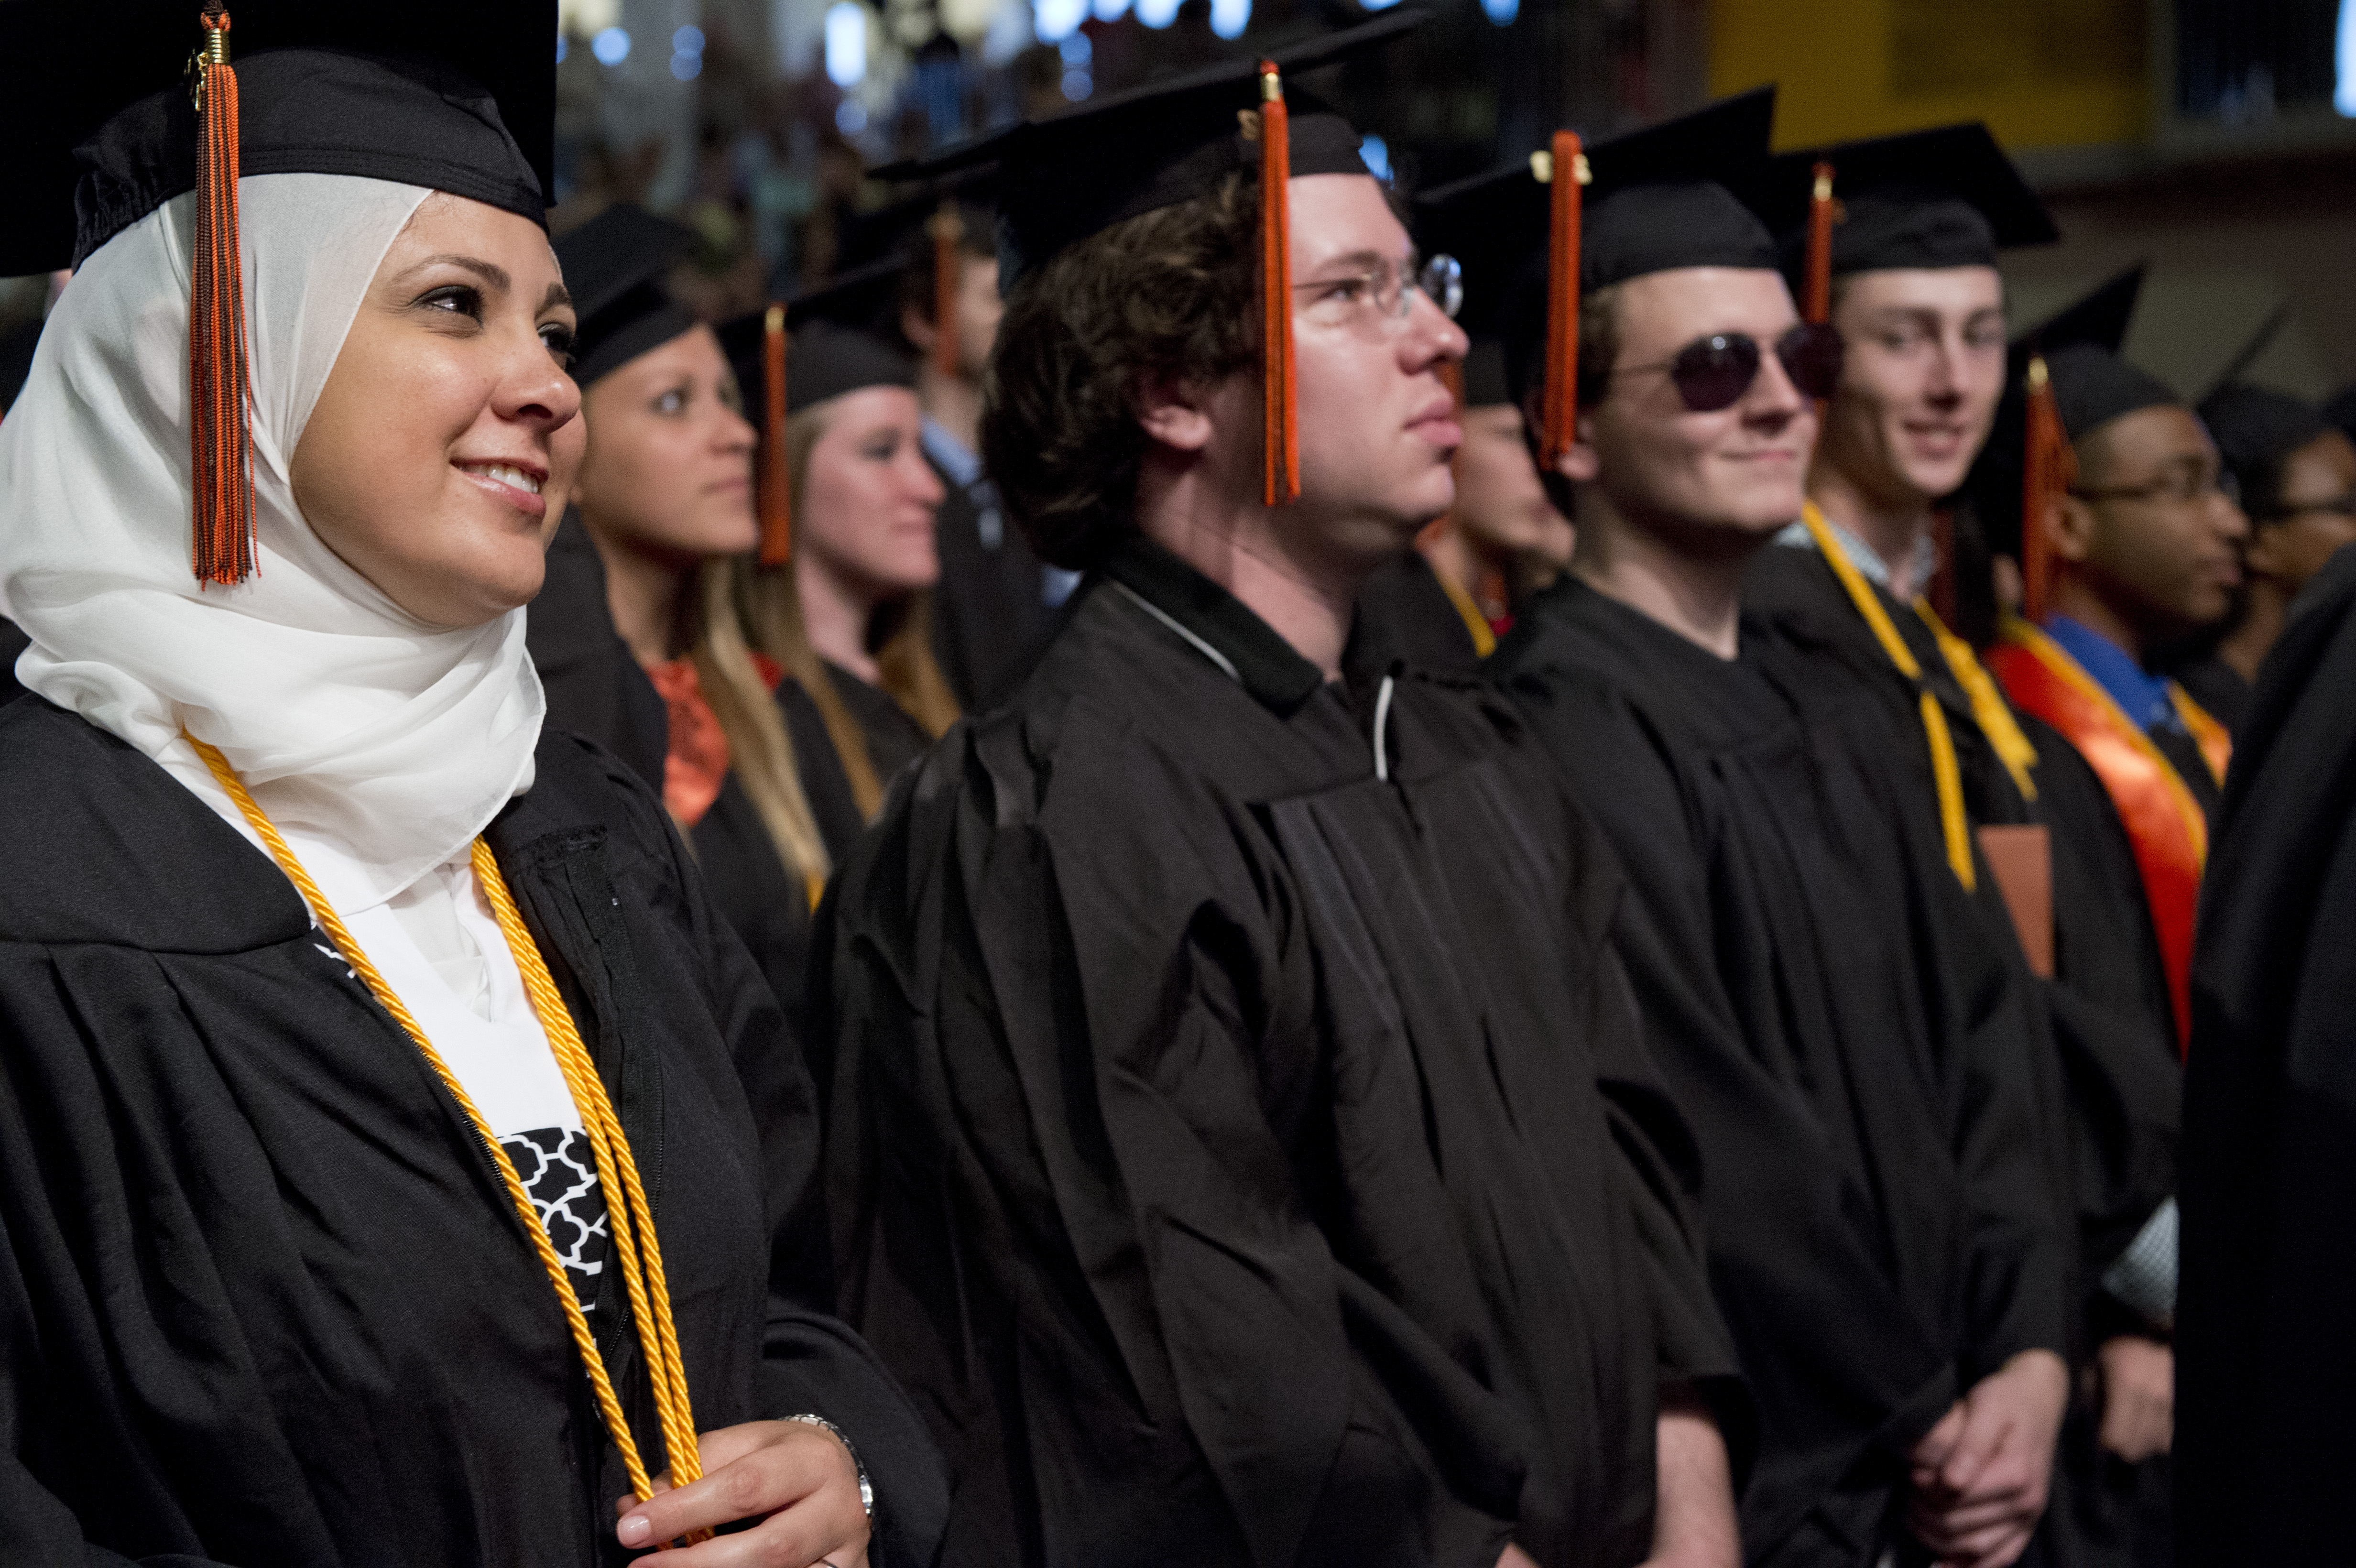 students standing at commencement in cap and gown while looking toward stage